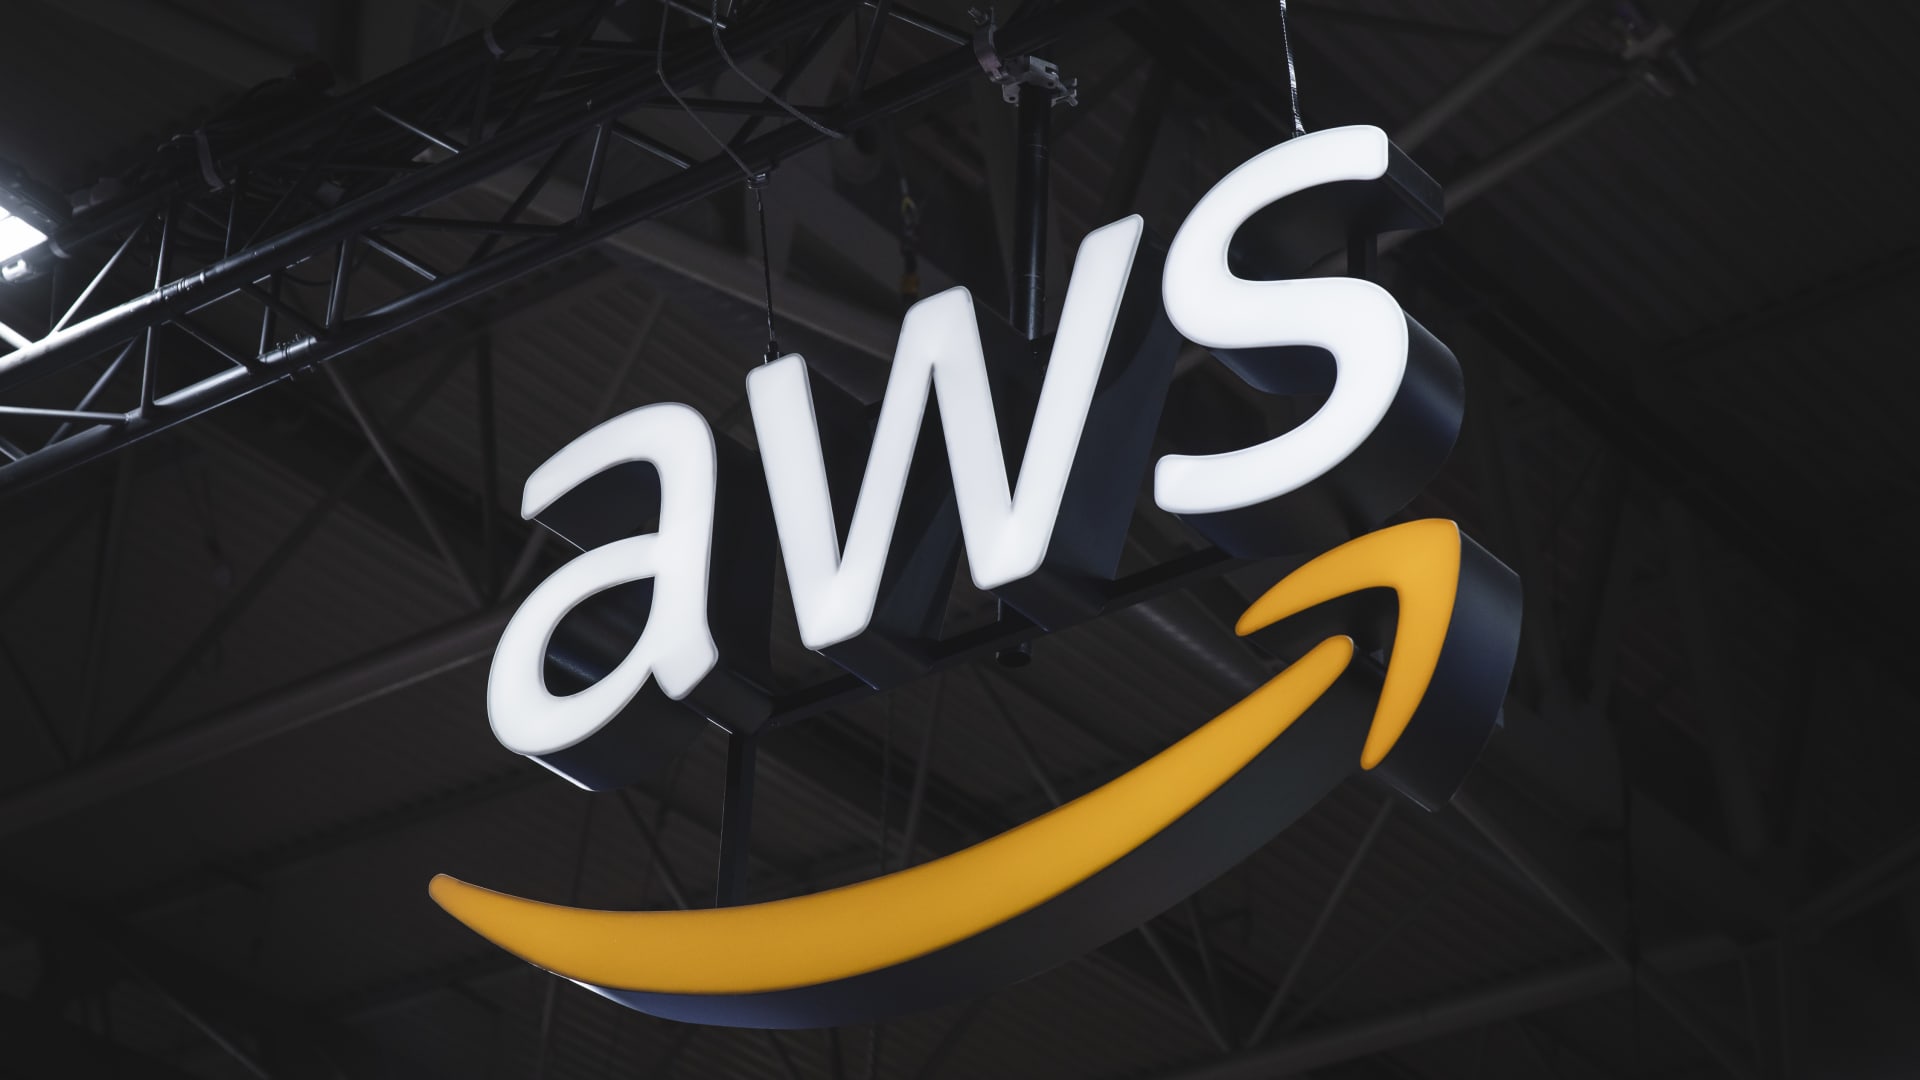 Amazon reportedly in talks with Italy to invest billions of euros in cloud expansion [Video]